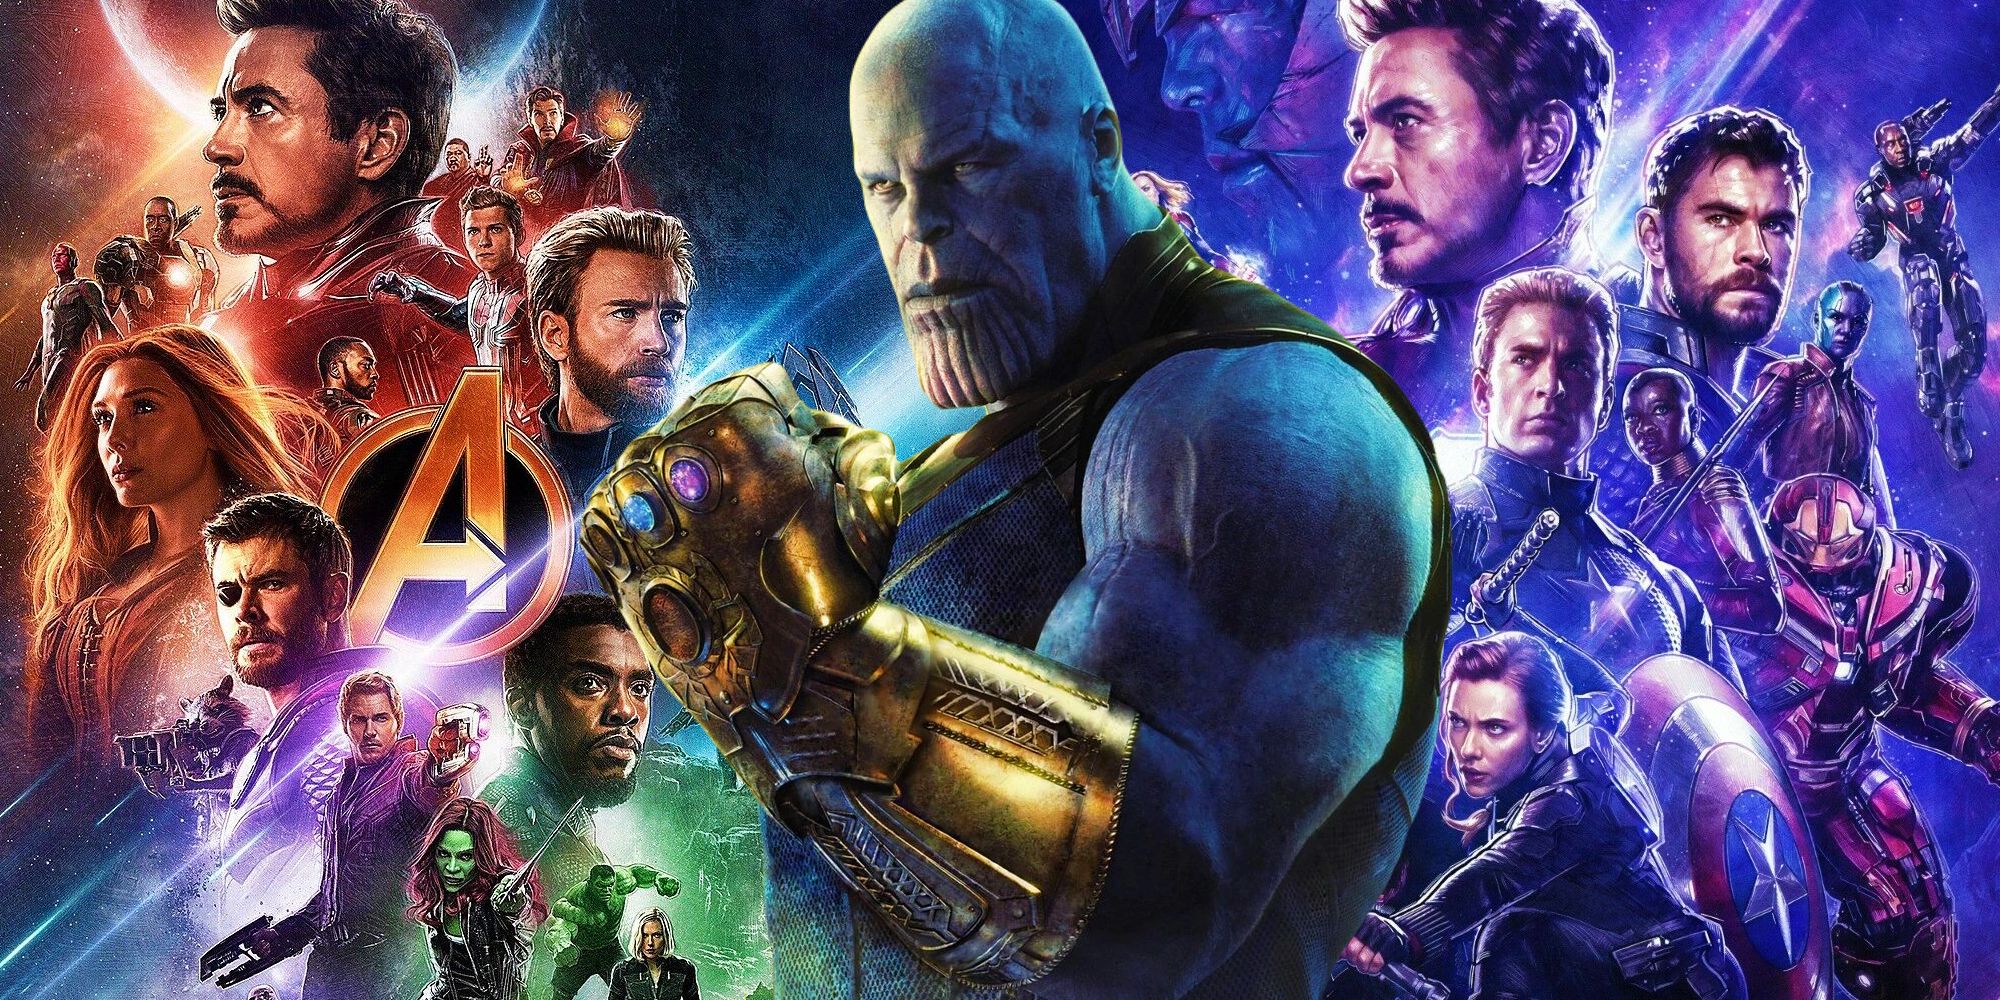 The MCU's Thanos wielding the Infinity Gauntlet between the posters for Avengers: Infinity War and Avengers: Endgame